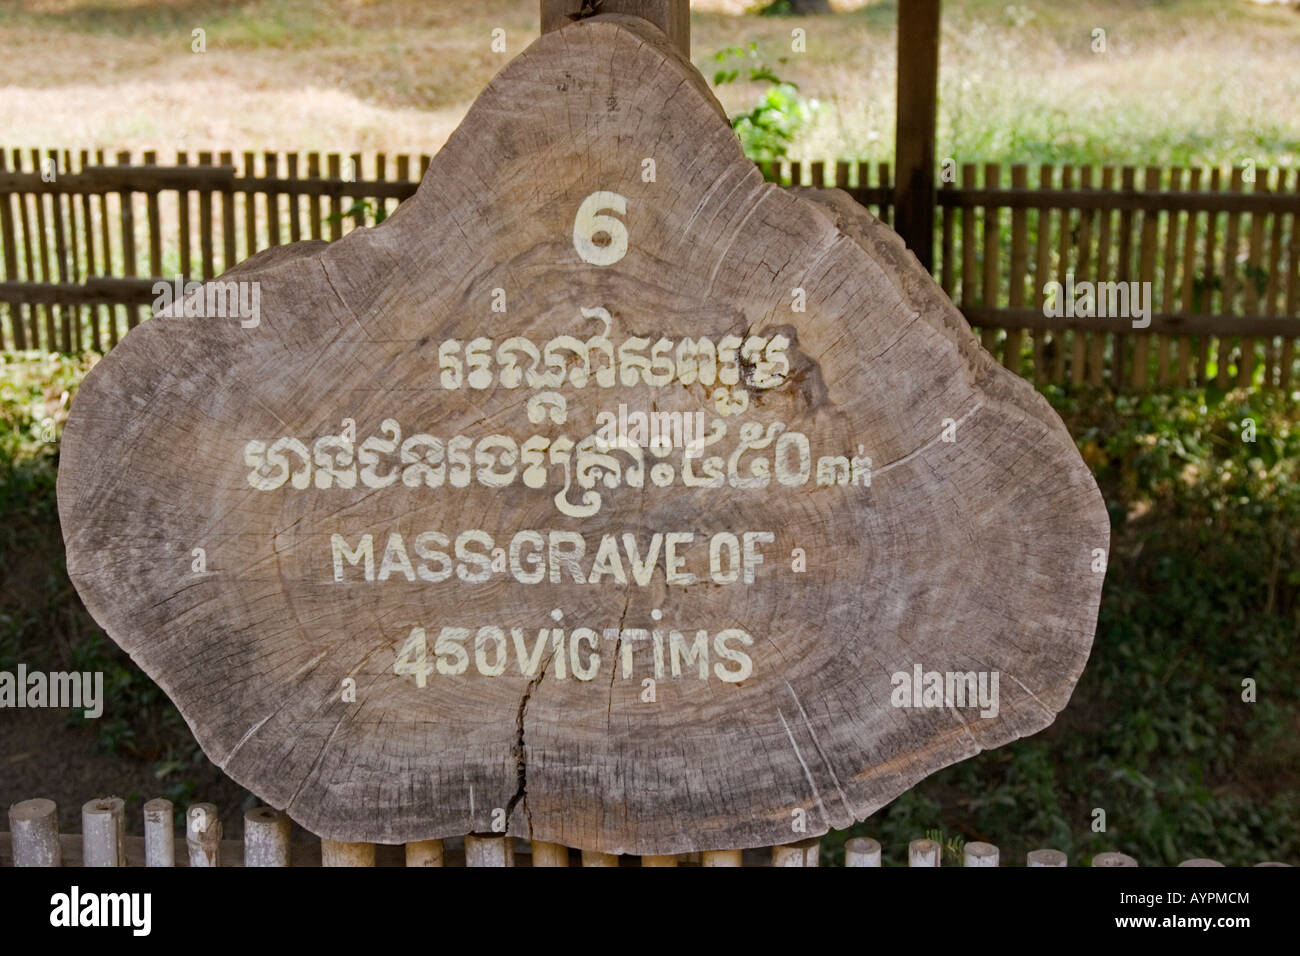 Sign marking a mass grave where 450 victims of the Khmer Rouge killing fields are buried, Phnom Penh, Cambodia, Southeast Asia Stock Photo